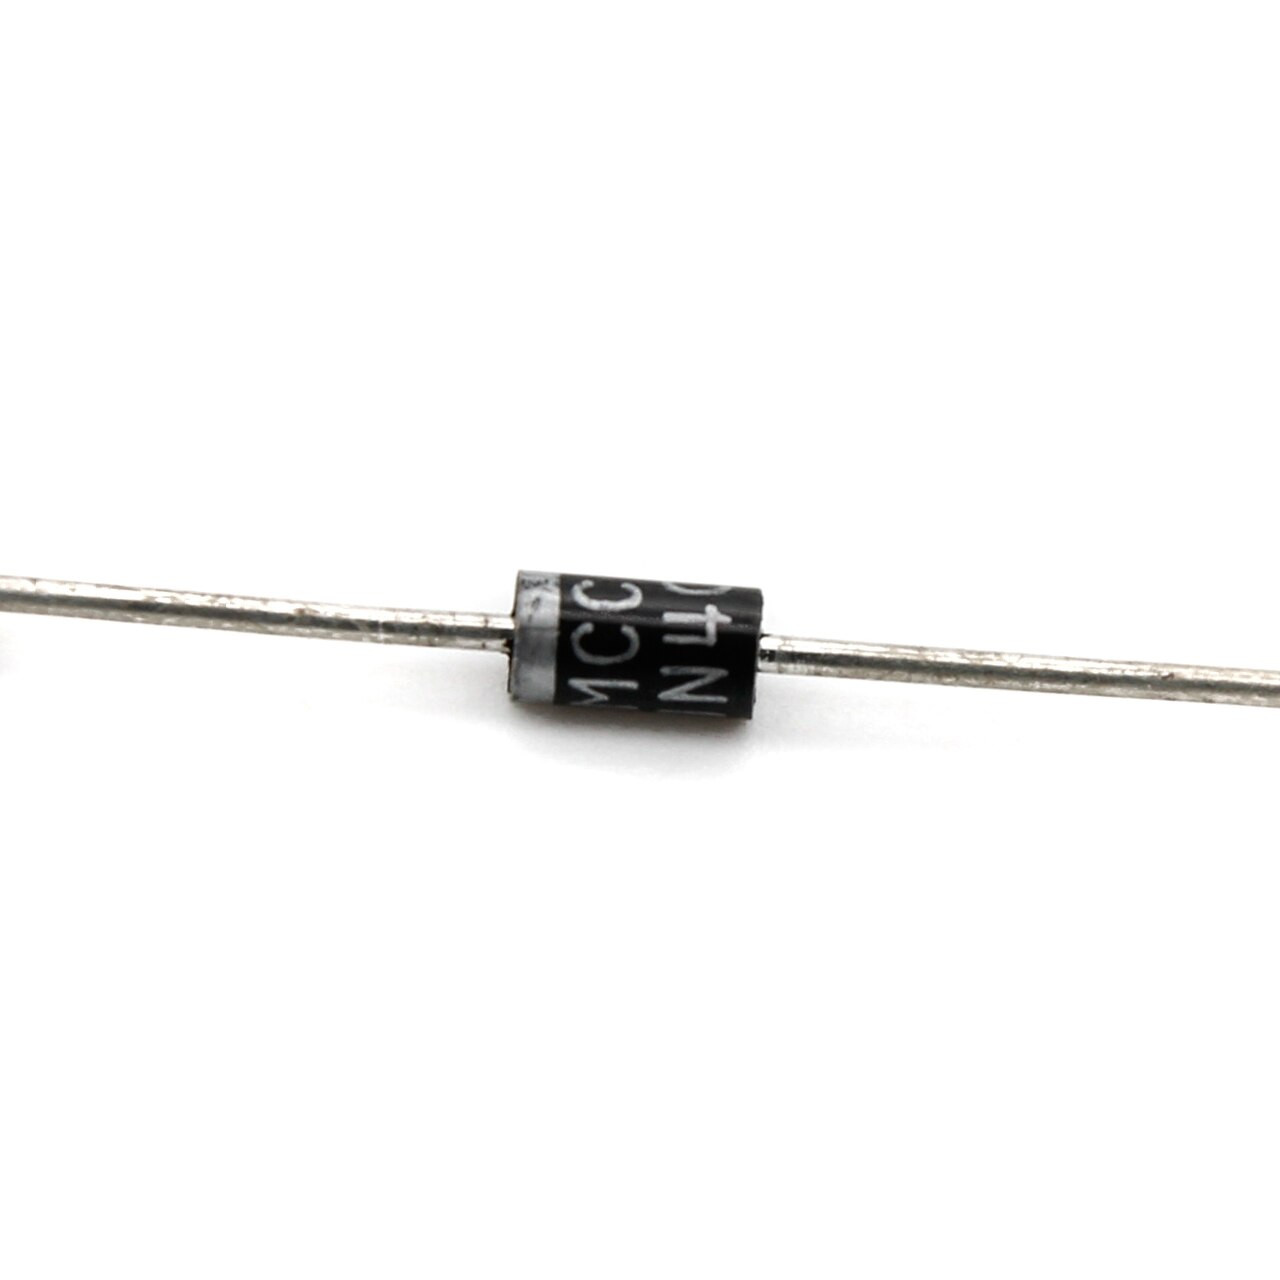 1N4002 - Rectifier Diode - 10  pack